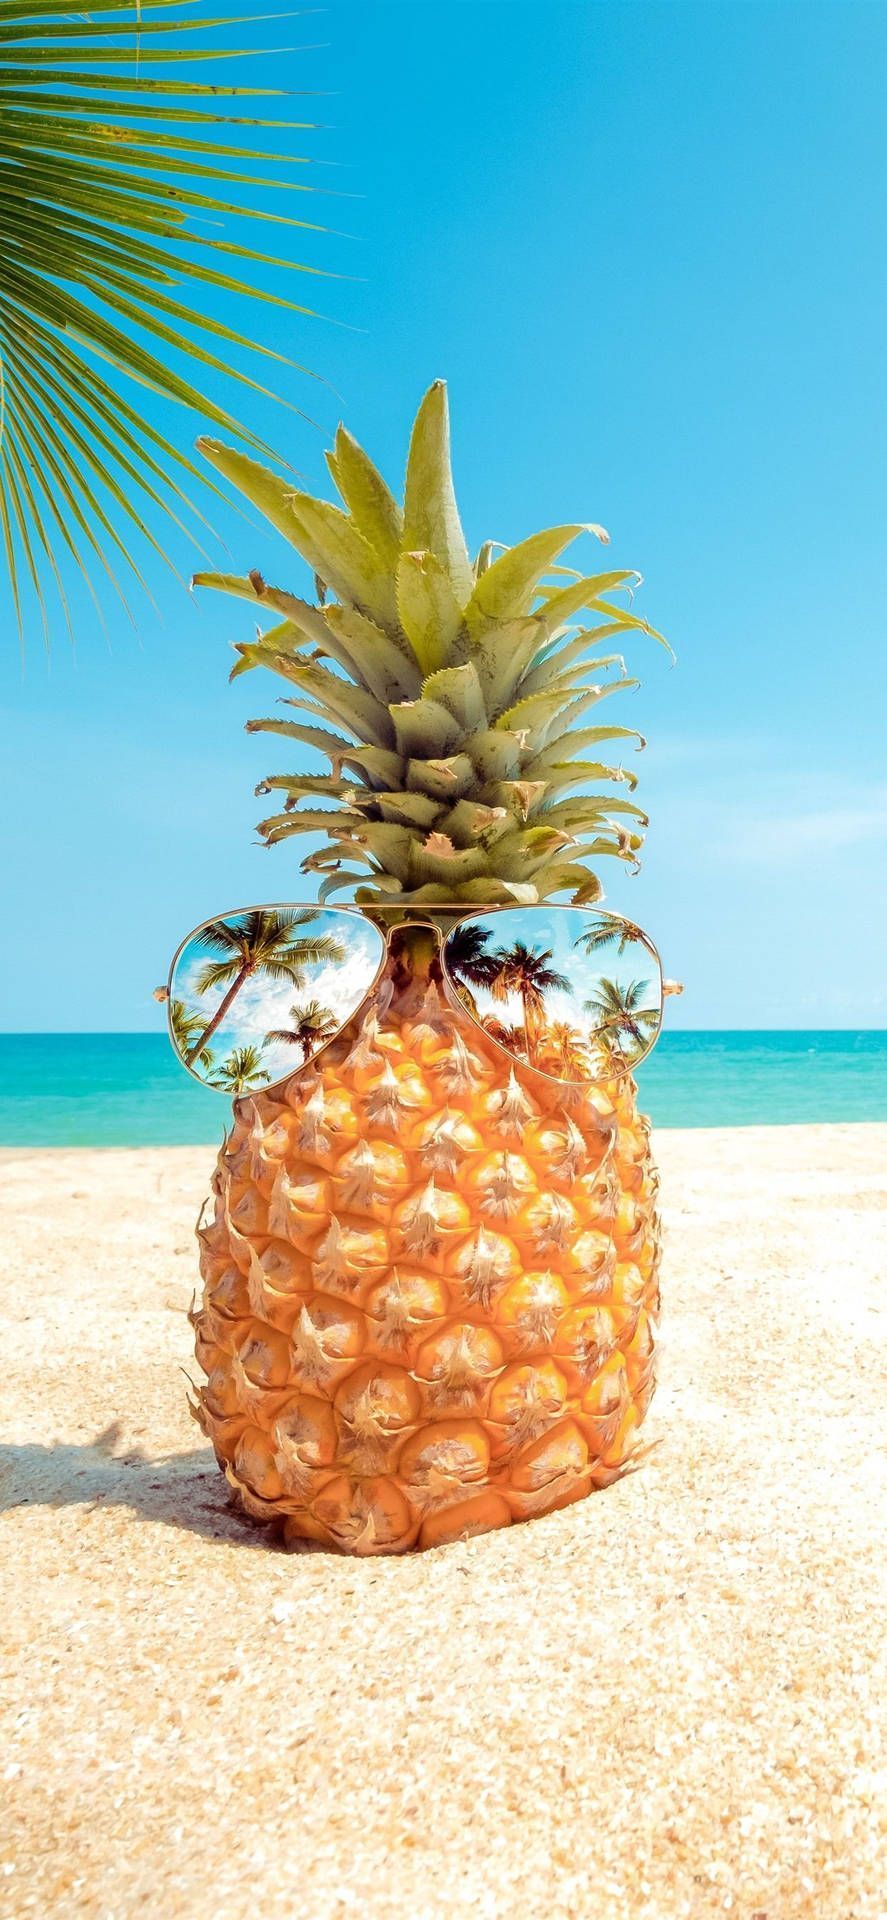 A pineapple on the beach wearing sunglasses. - Pineapple